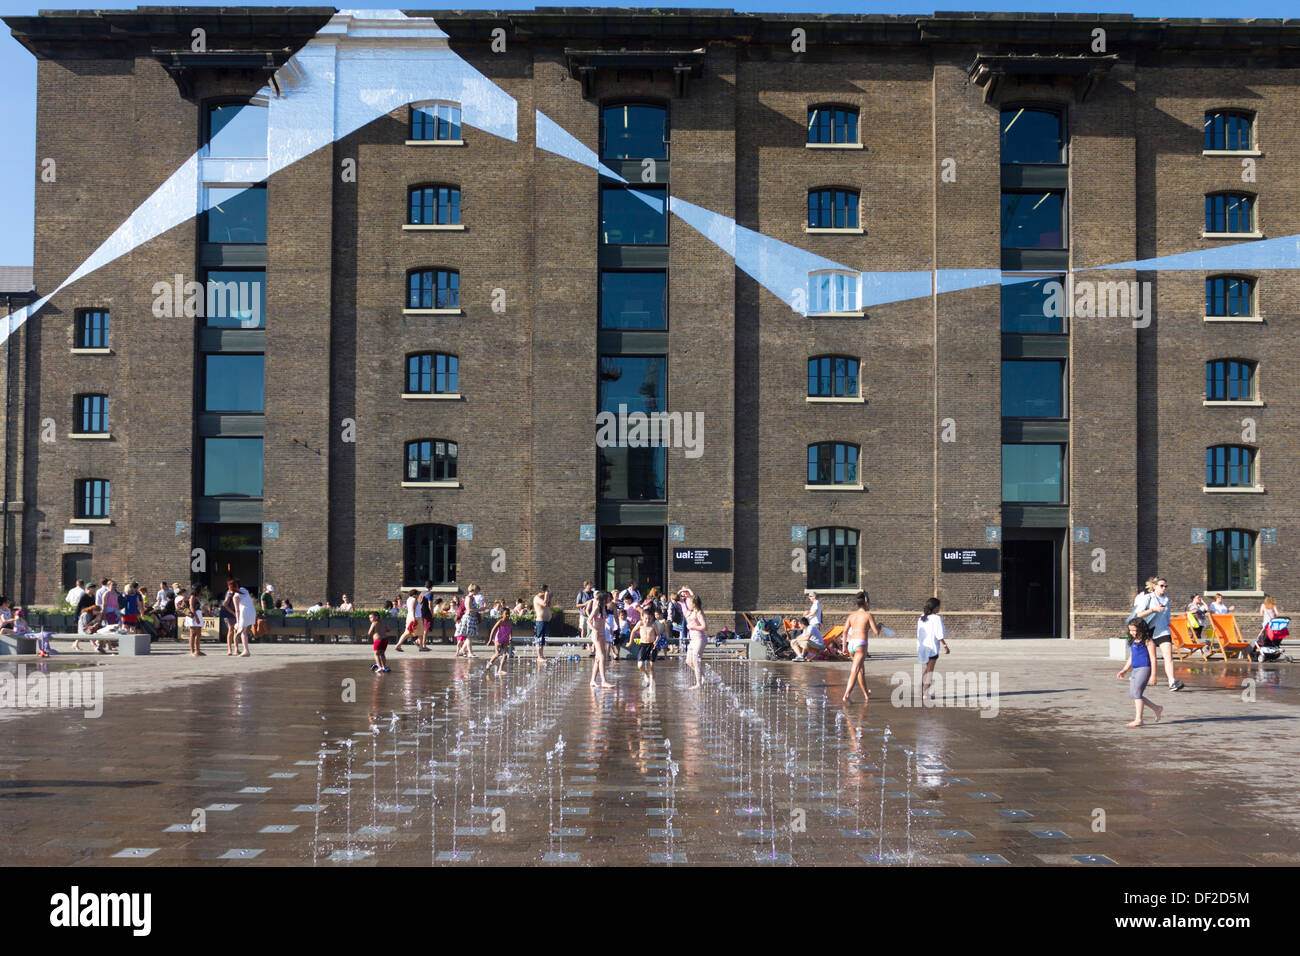 University of Arts - Central St Martins Campus - Kings Cross Central - London Foto Stock